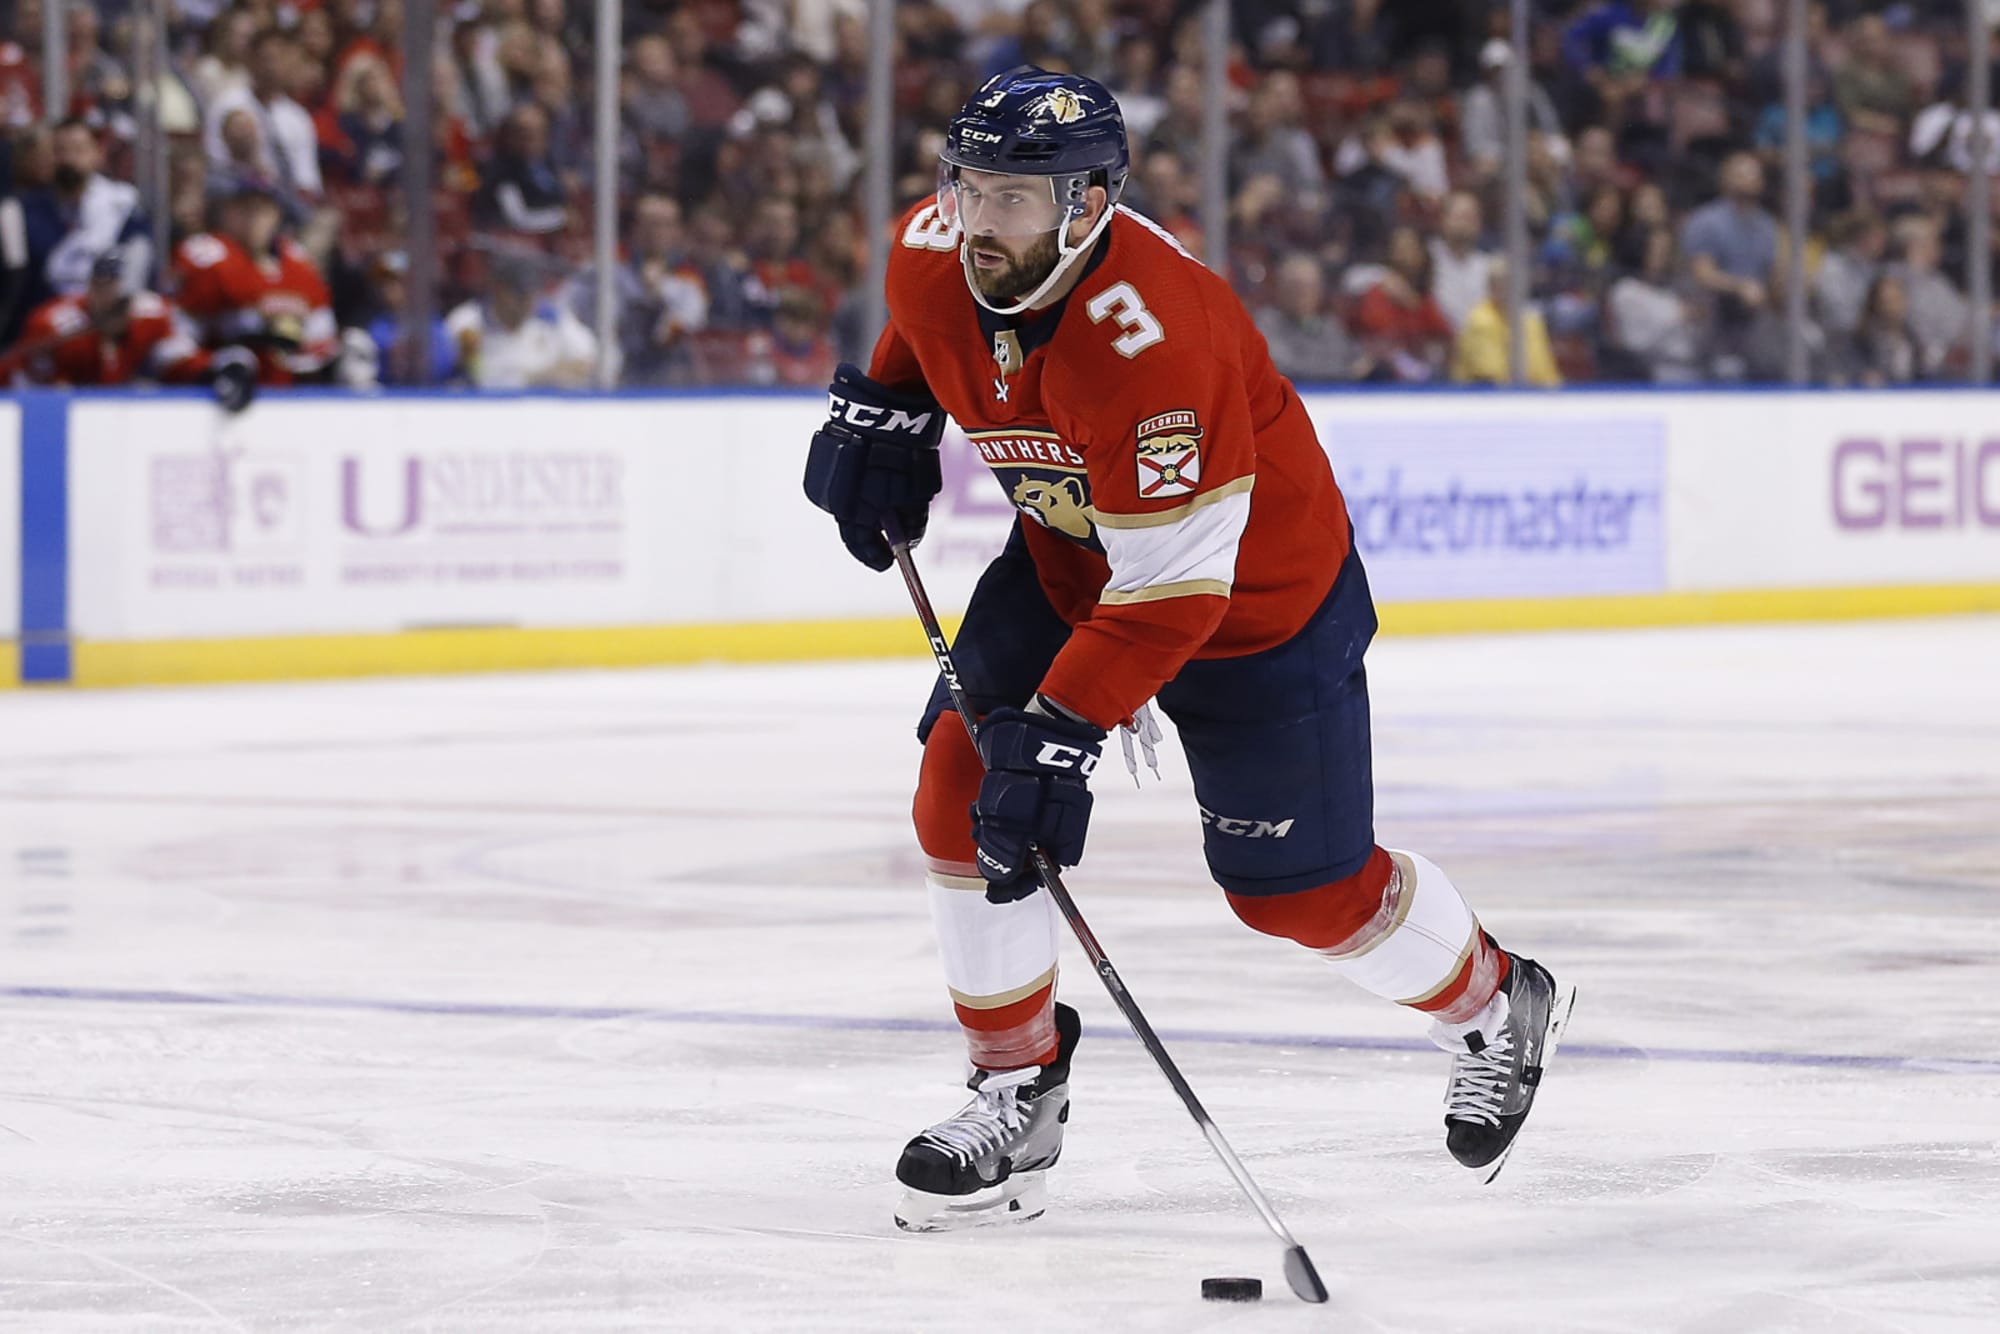 Can Keith Yandle turn his career around like Kevin Shattenkirk?